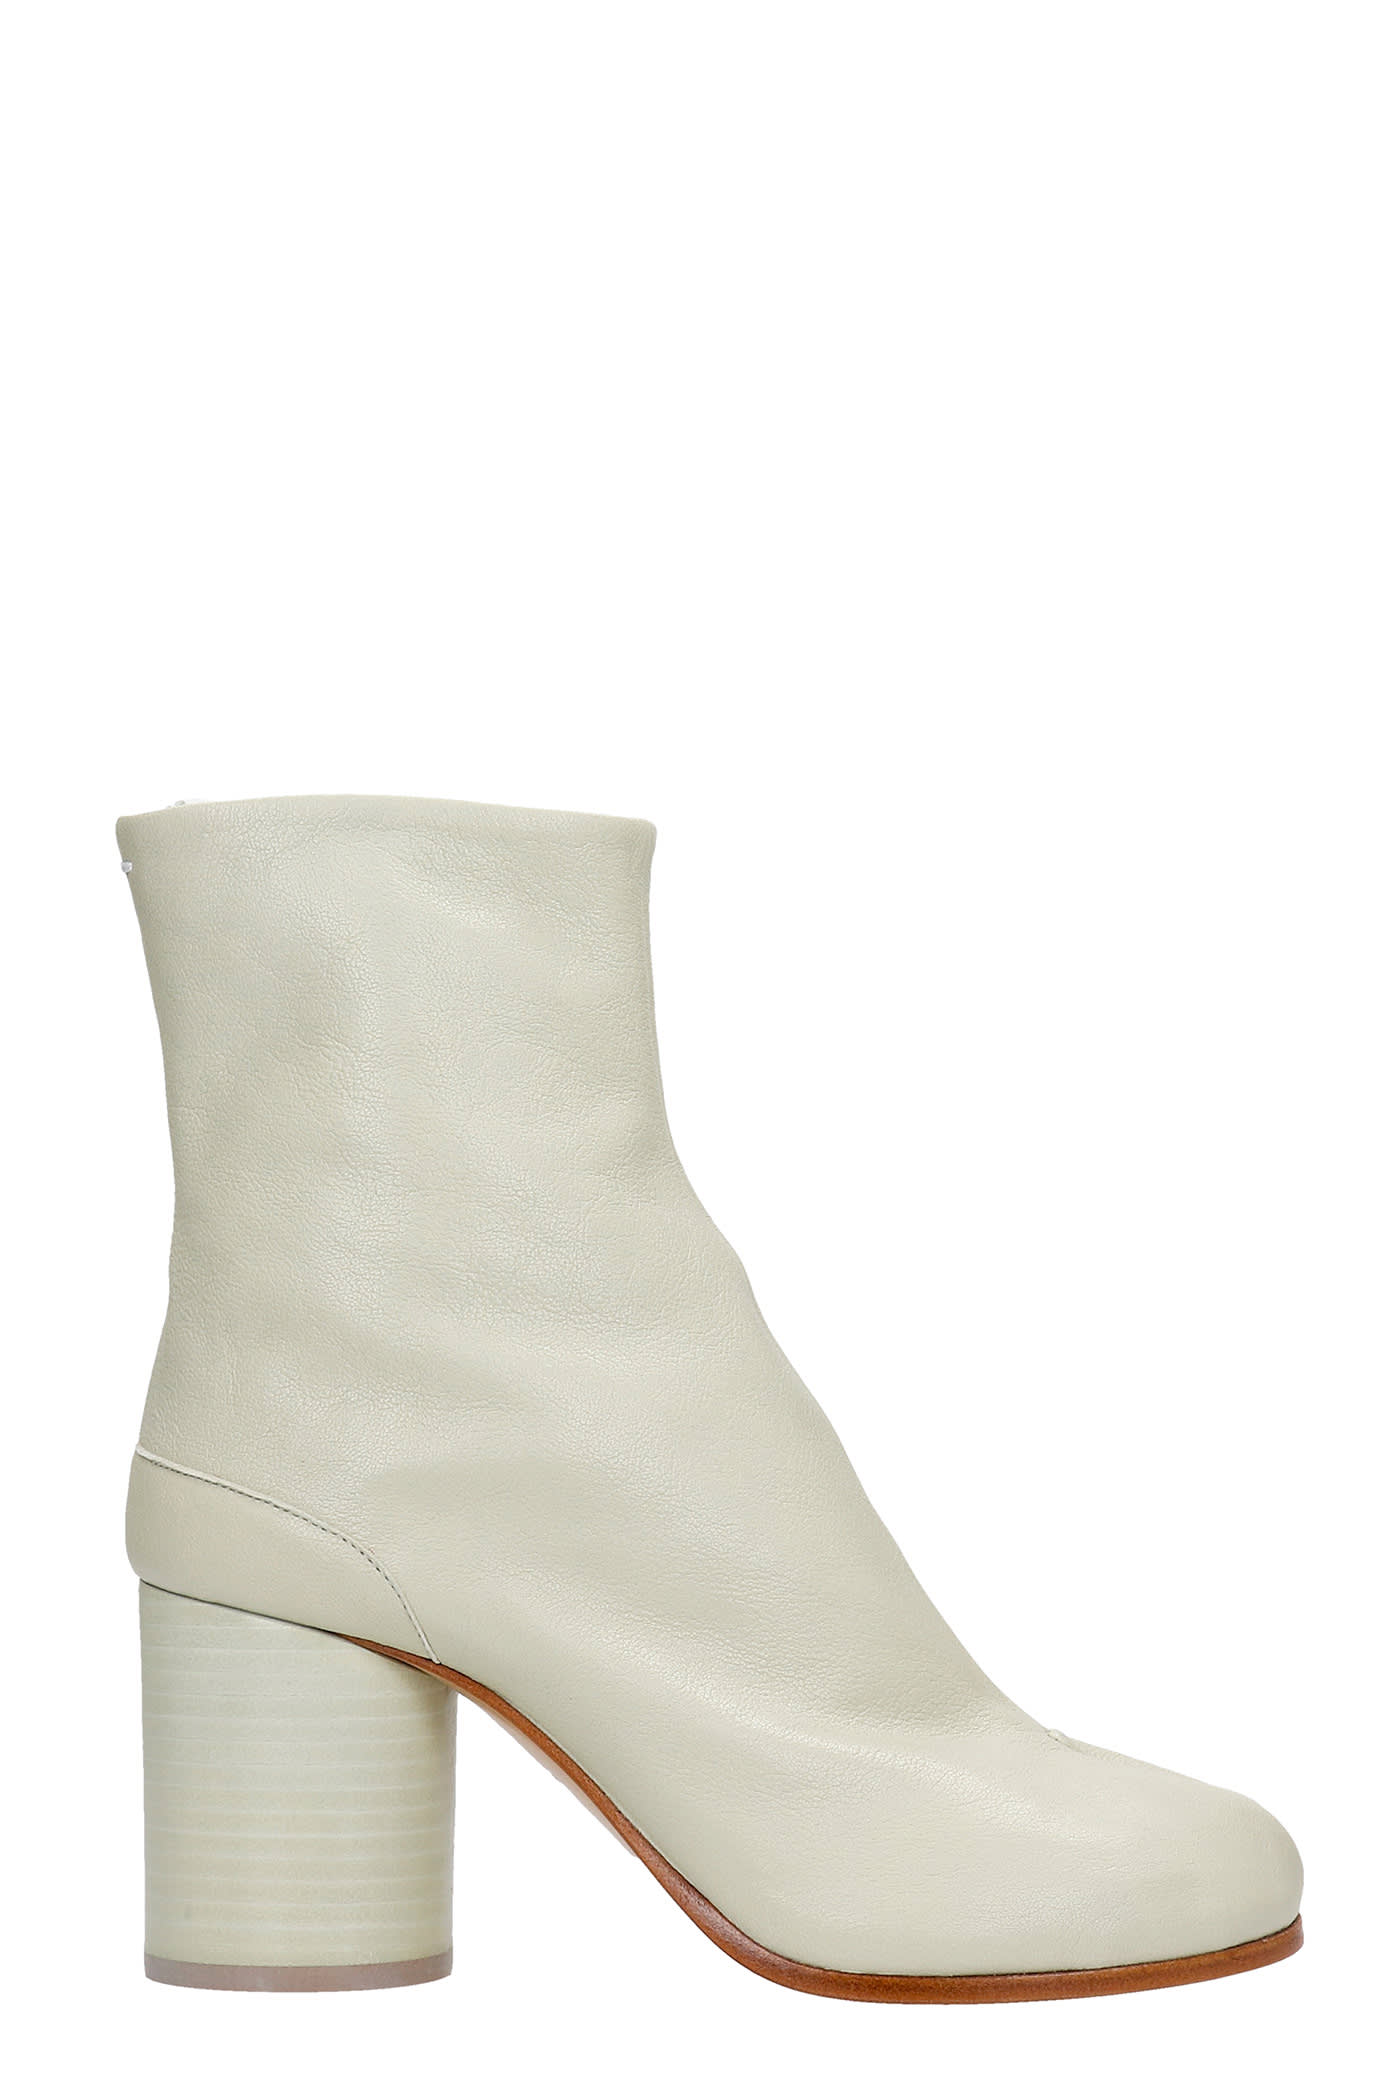 Maison Margiela Tabi High Heels Ankle Boots In Green Leather